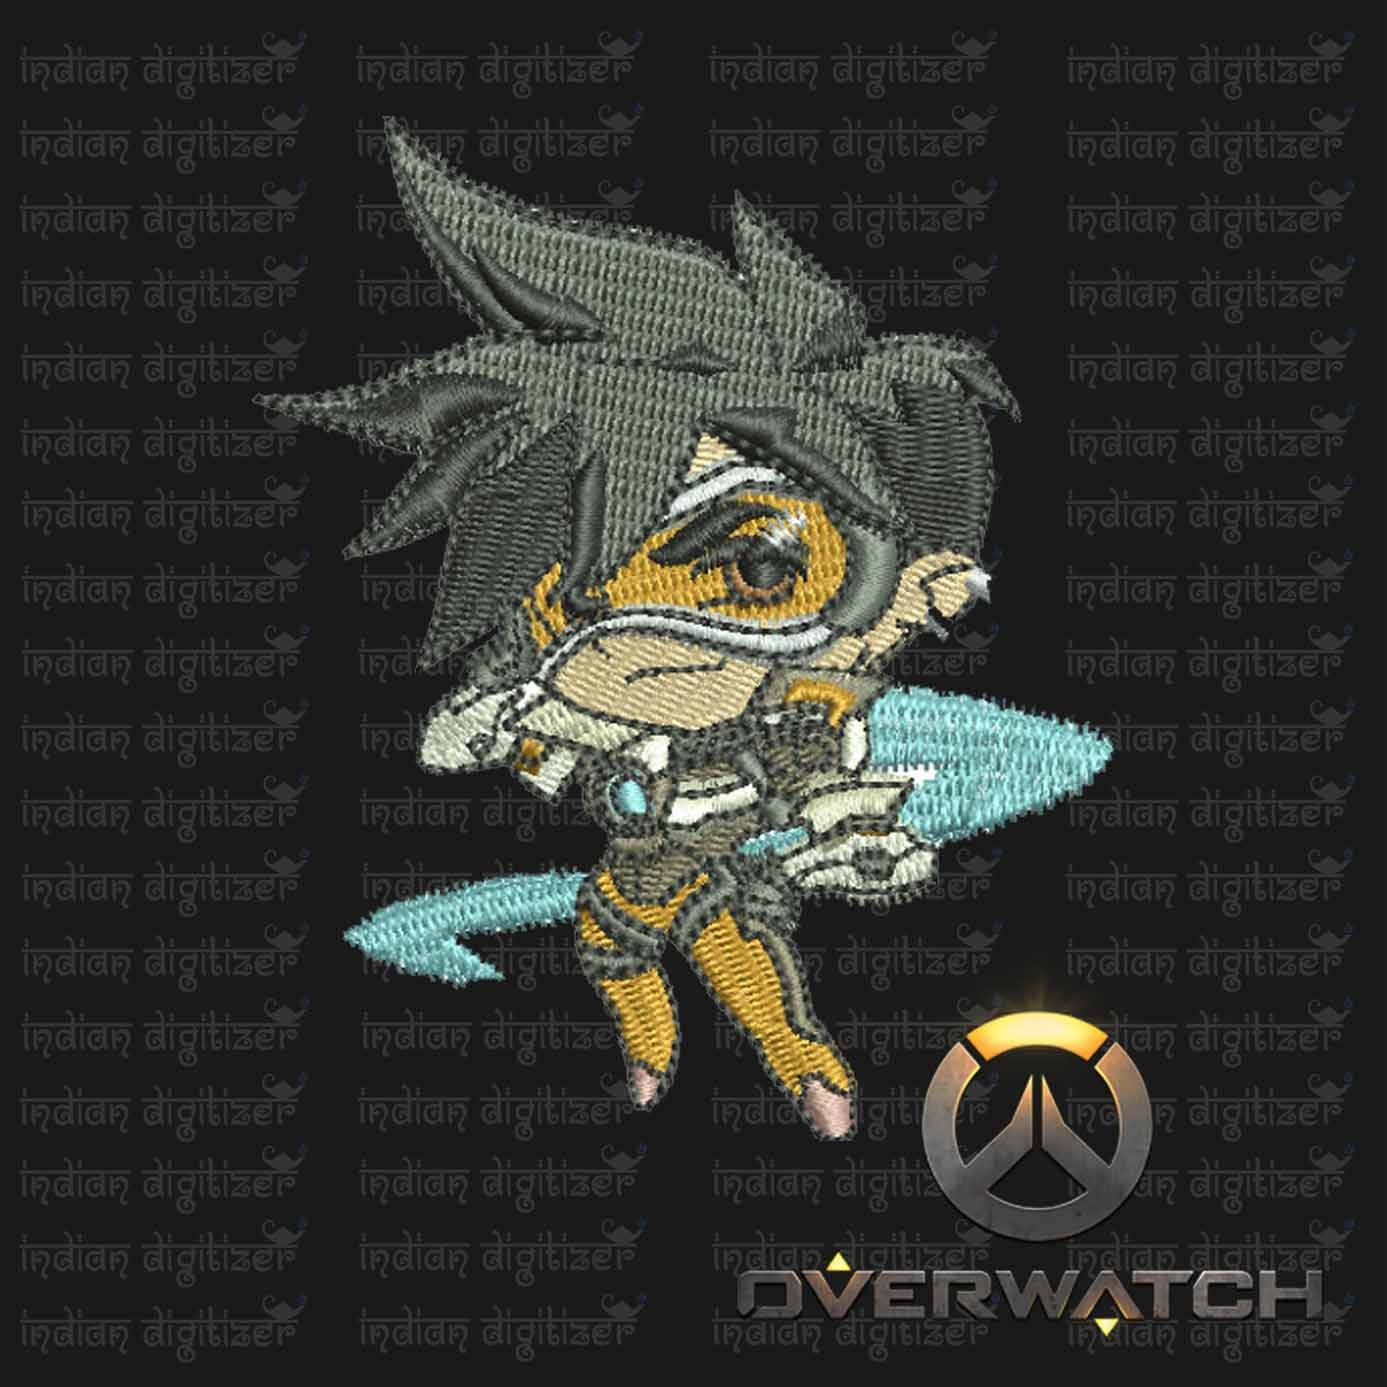 Overwatch Embroidery Designs - Tracer individual character for 4x4in hoop - resizable with freely downloadable software.